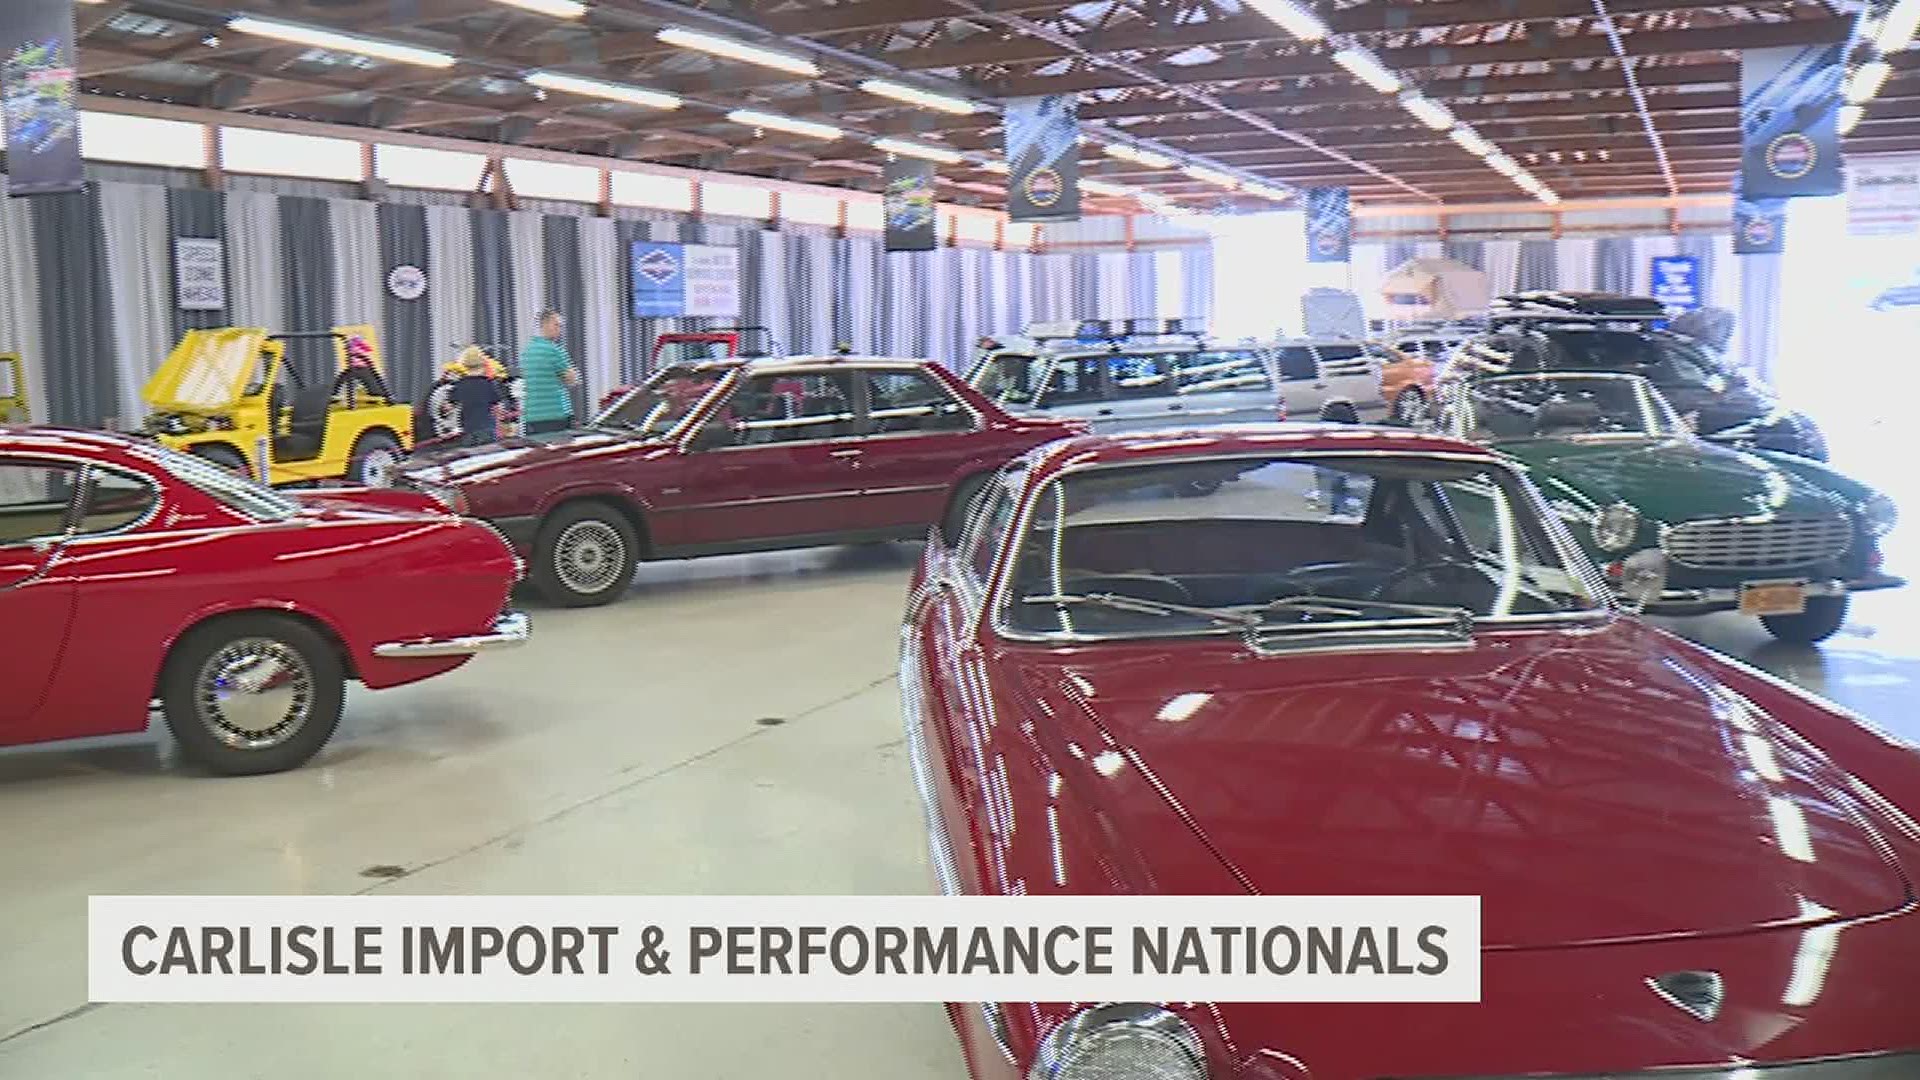 The show has thousands of imports, motorcycles, trucks and other high-performance vehicles.